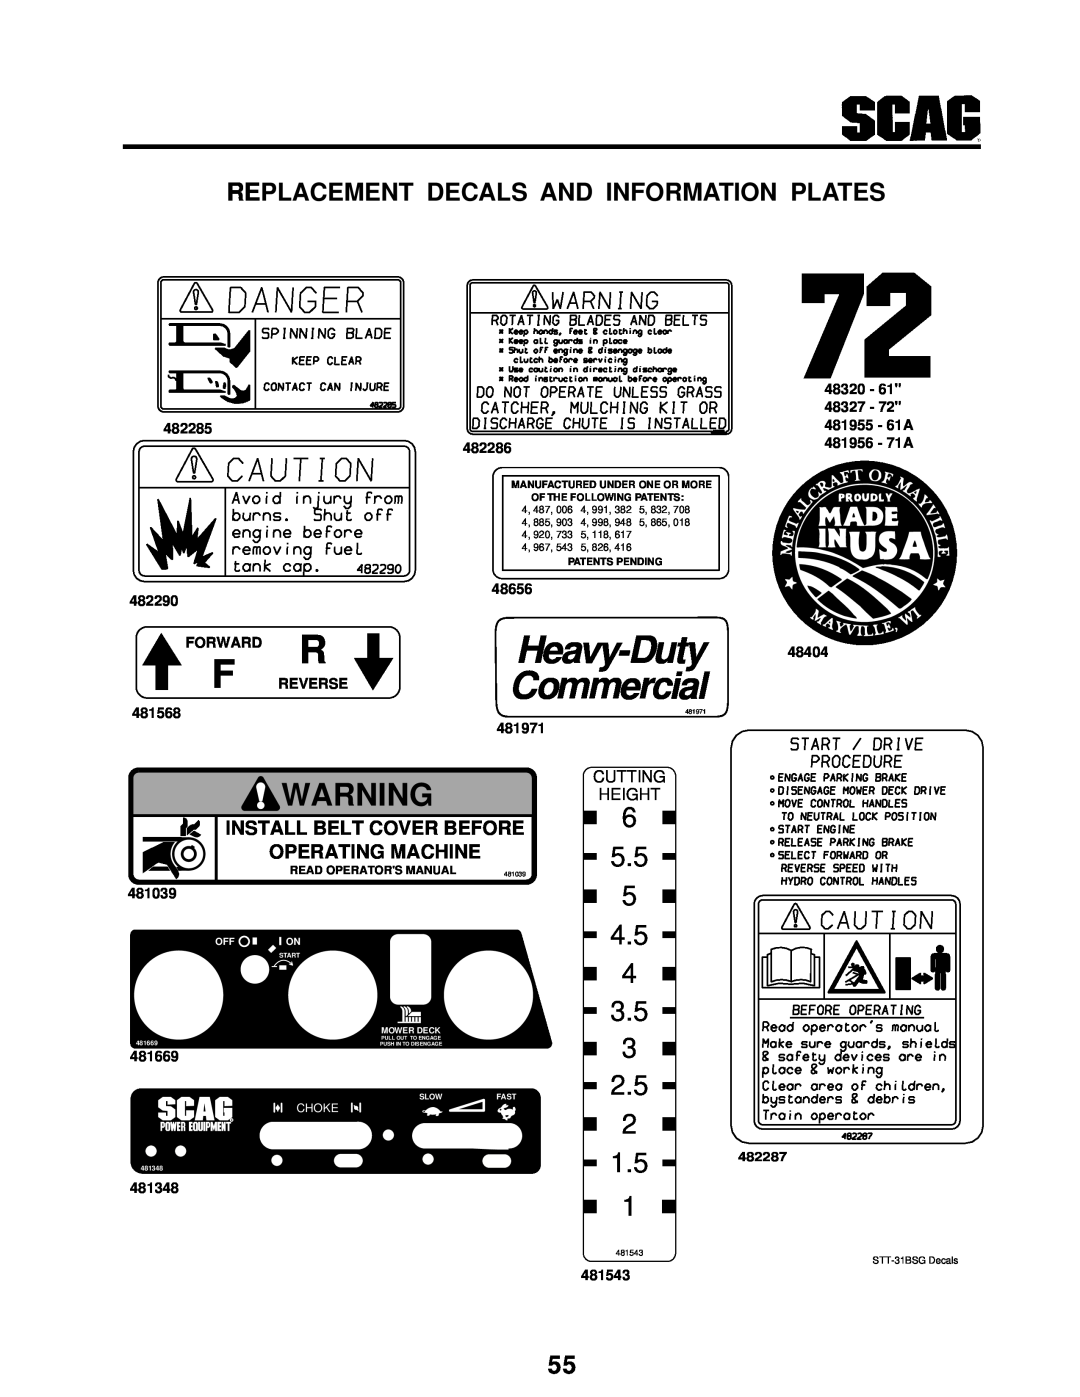 Scag Power Equipment STT-31BSG manual Replacement Decals And Information Plates, Heavy-Duty, Commercial, Operating Machine 